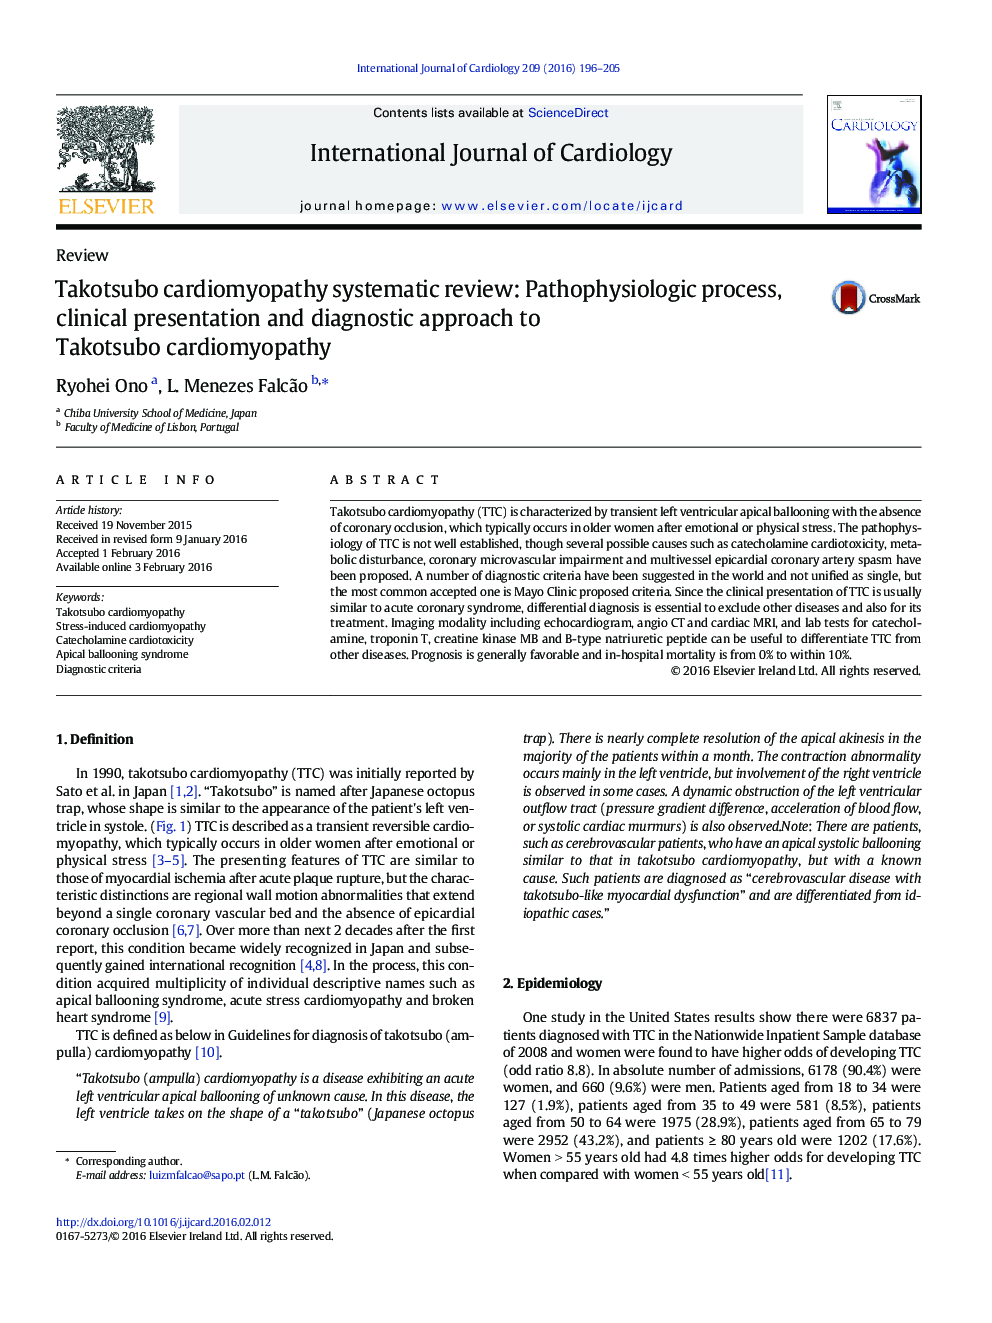 Takotsubo cardiomyopathy systematic review: Pathophysiologic process, clinical presentation and diagnostic approach to Takotsubo cardiomyopathy